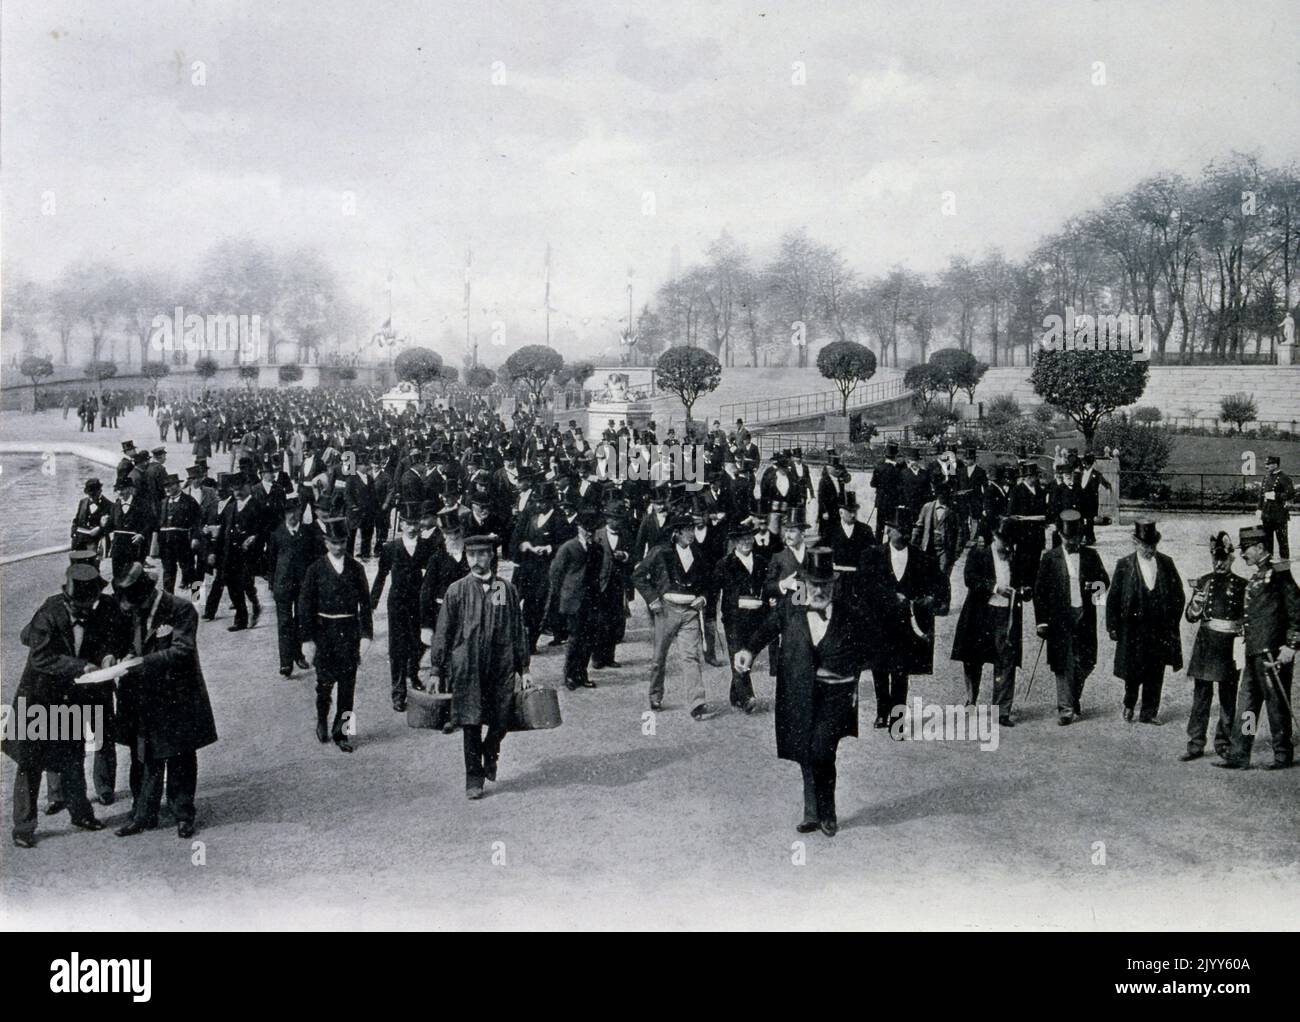 Exposition Universelle (World Fair) Paris, 1900; A crowd of civil servants arriving in Les Tuileries for the Universal Exhibition in Paris in 1900, beginning on 22nd September, the anniversary of the First Republic. Over 21,000 civil servants gathered together in the Jardin des Tuileries in Paris. Stock Photo